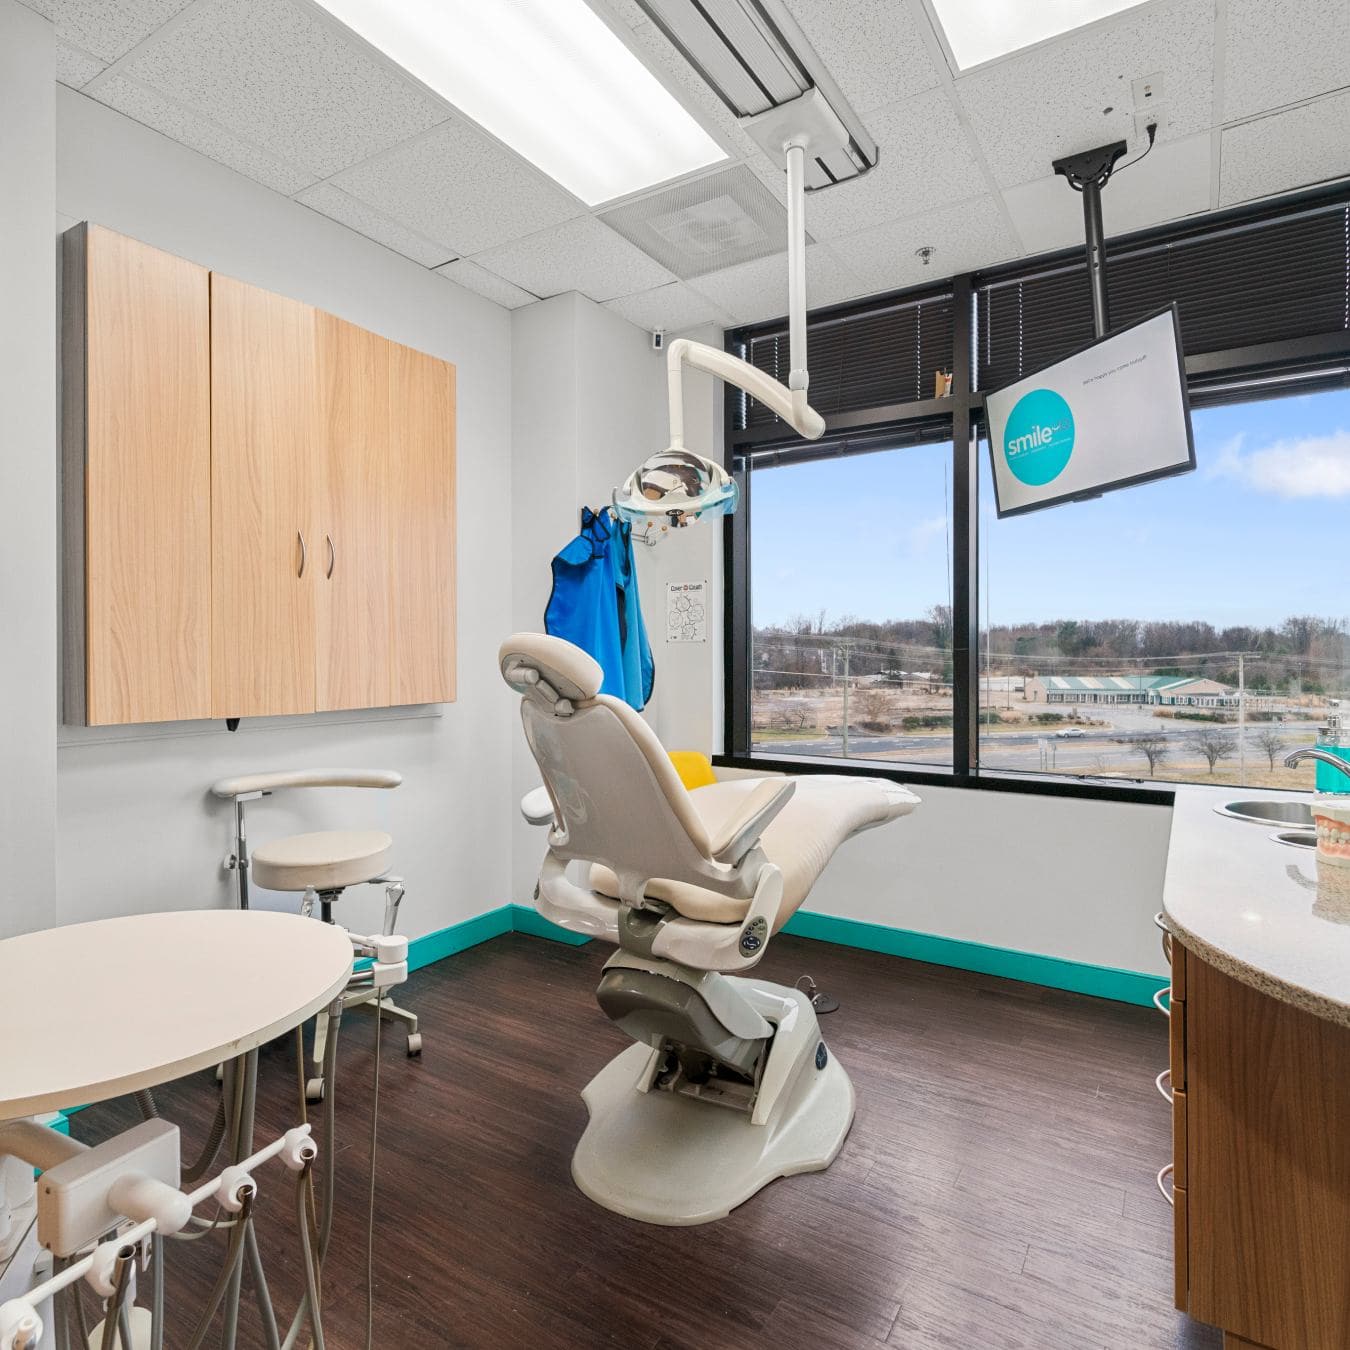 Exam room with chair and equipment